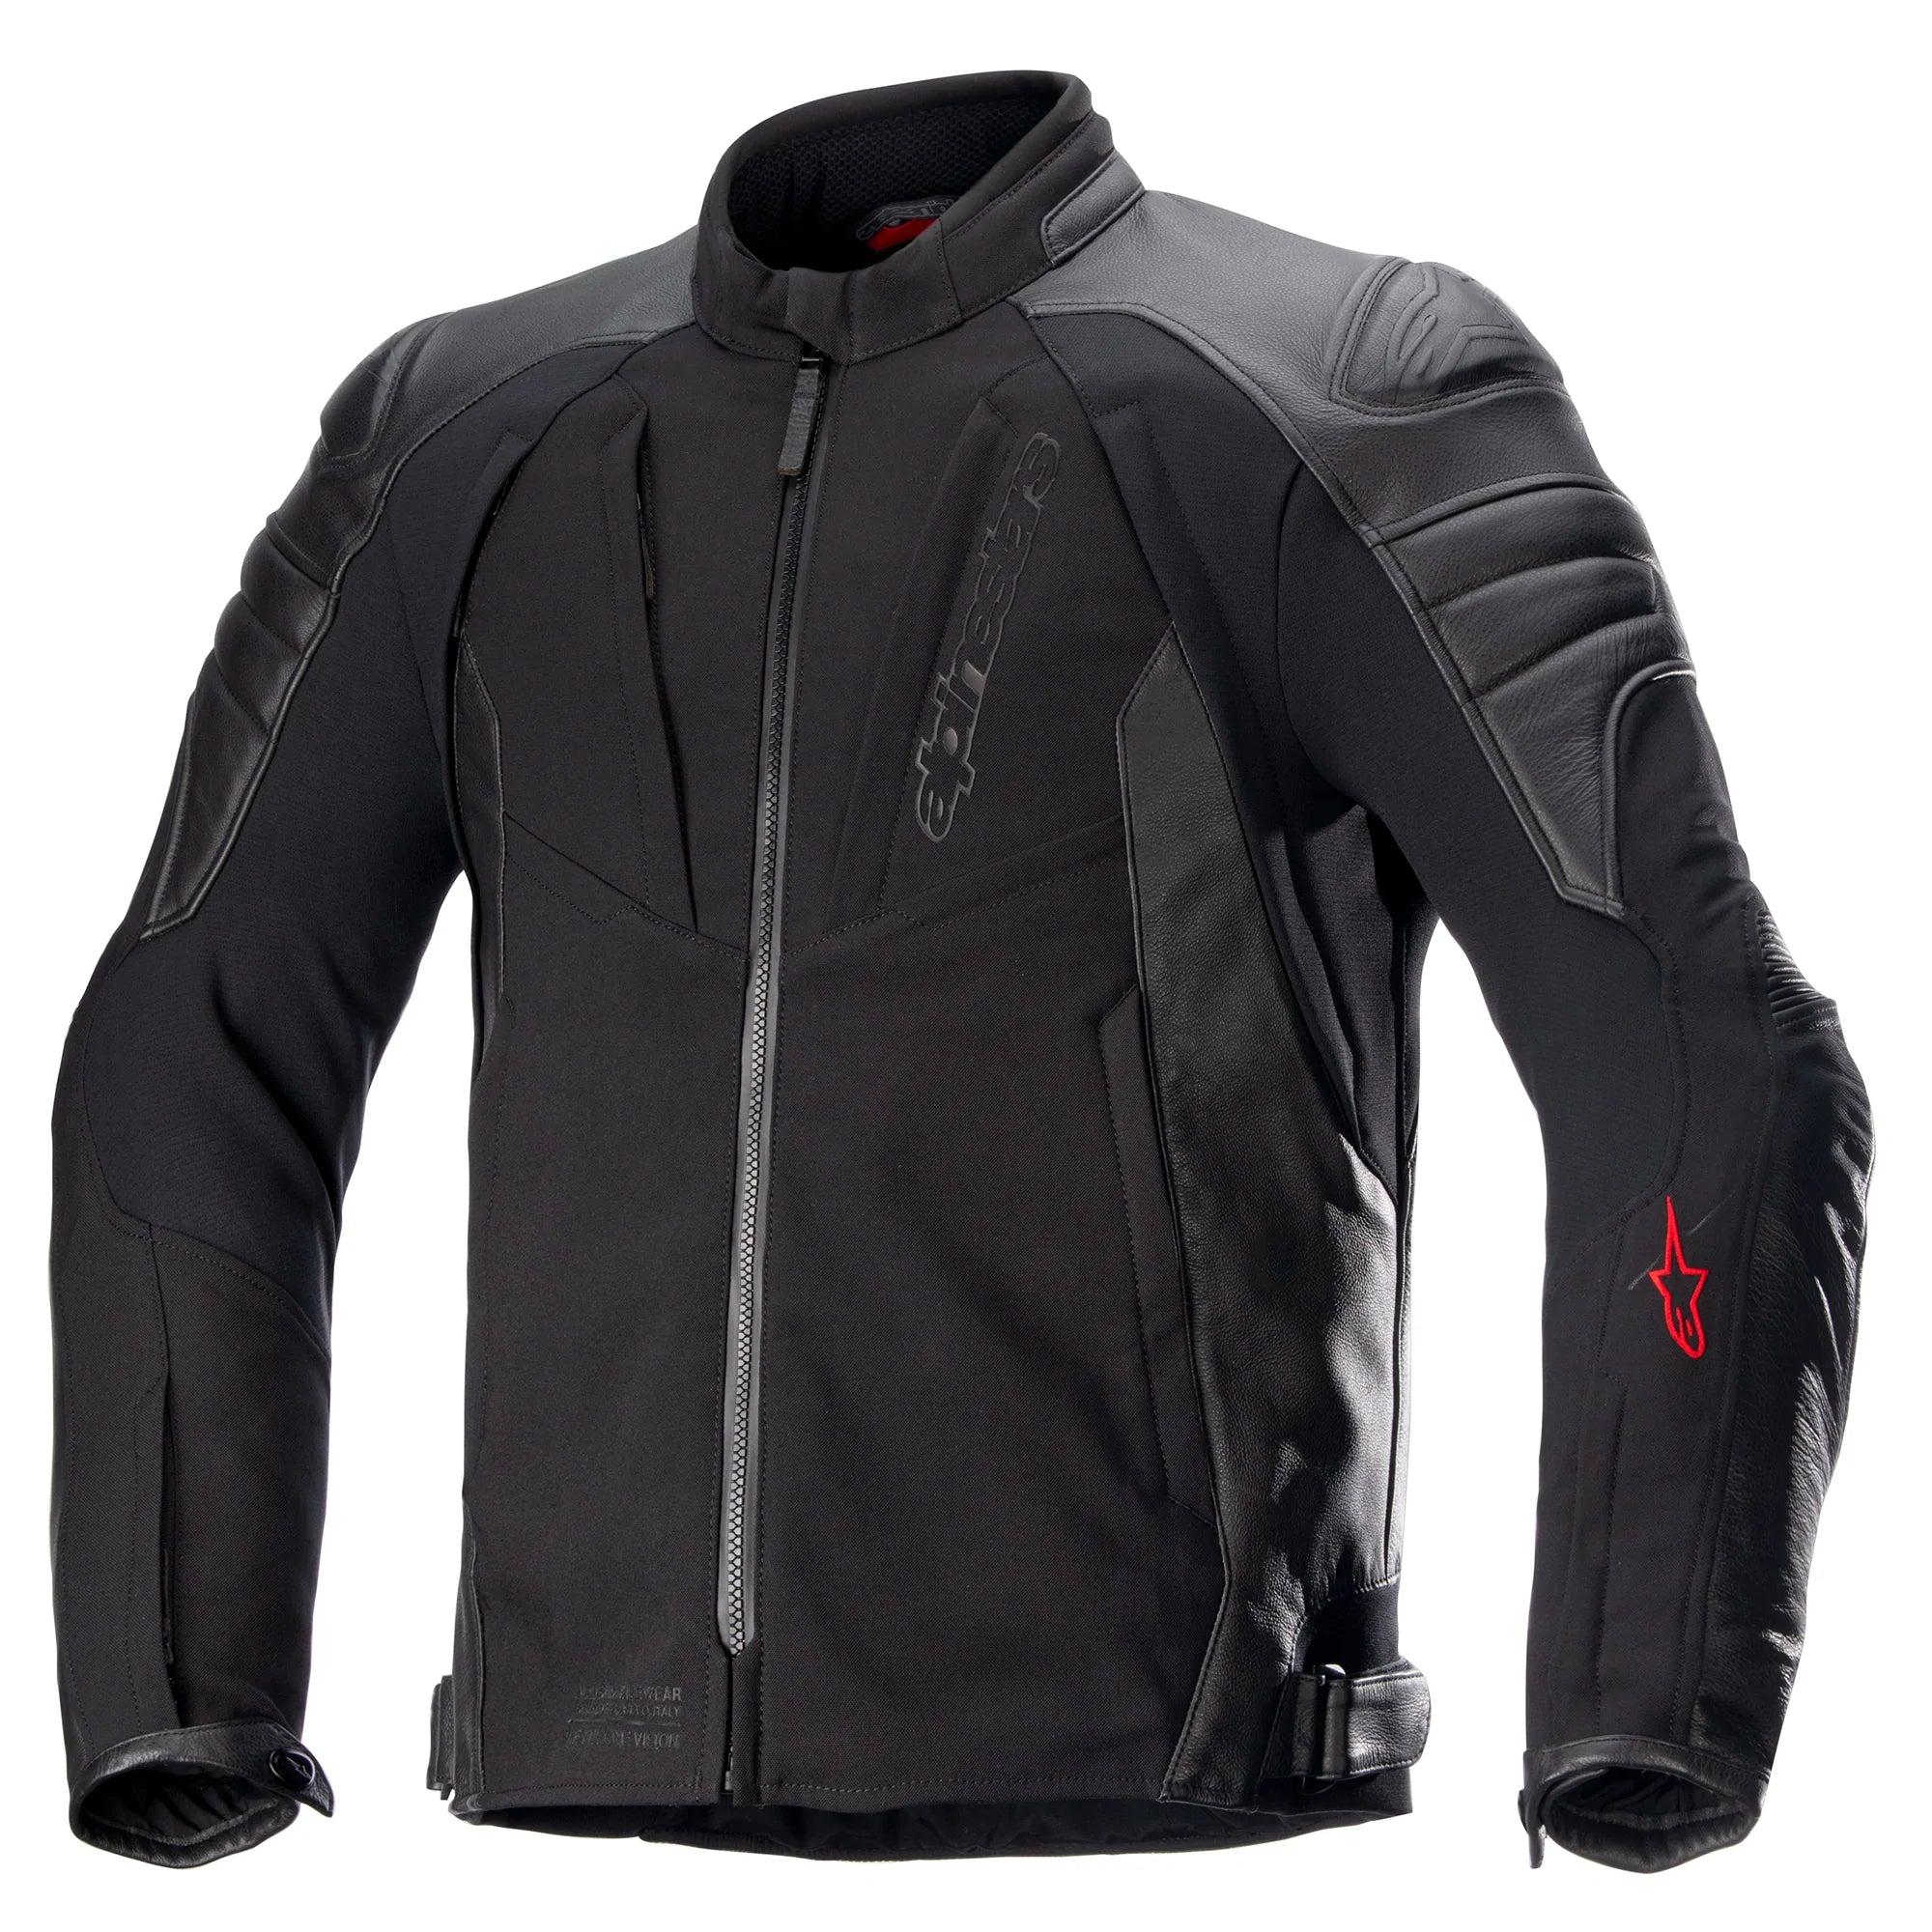 MO Tested: Alpinestars GP-R Perforated Leather Jacket | Motorcycle.com